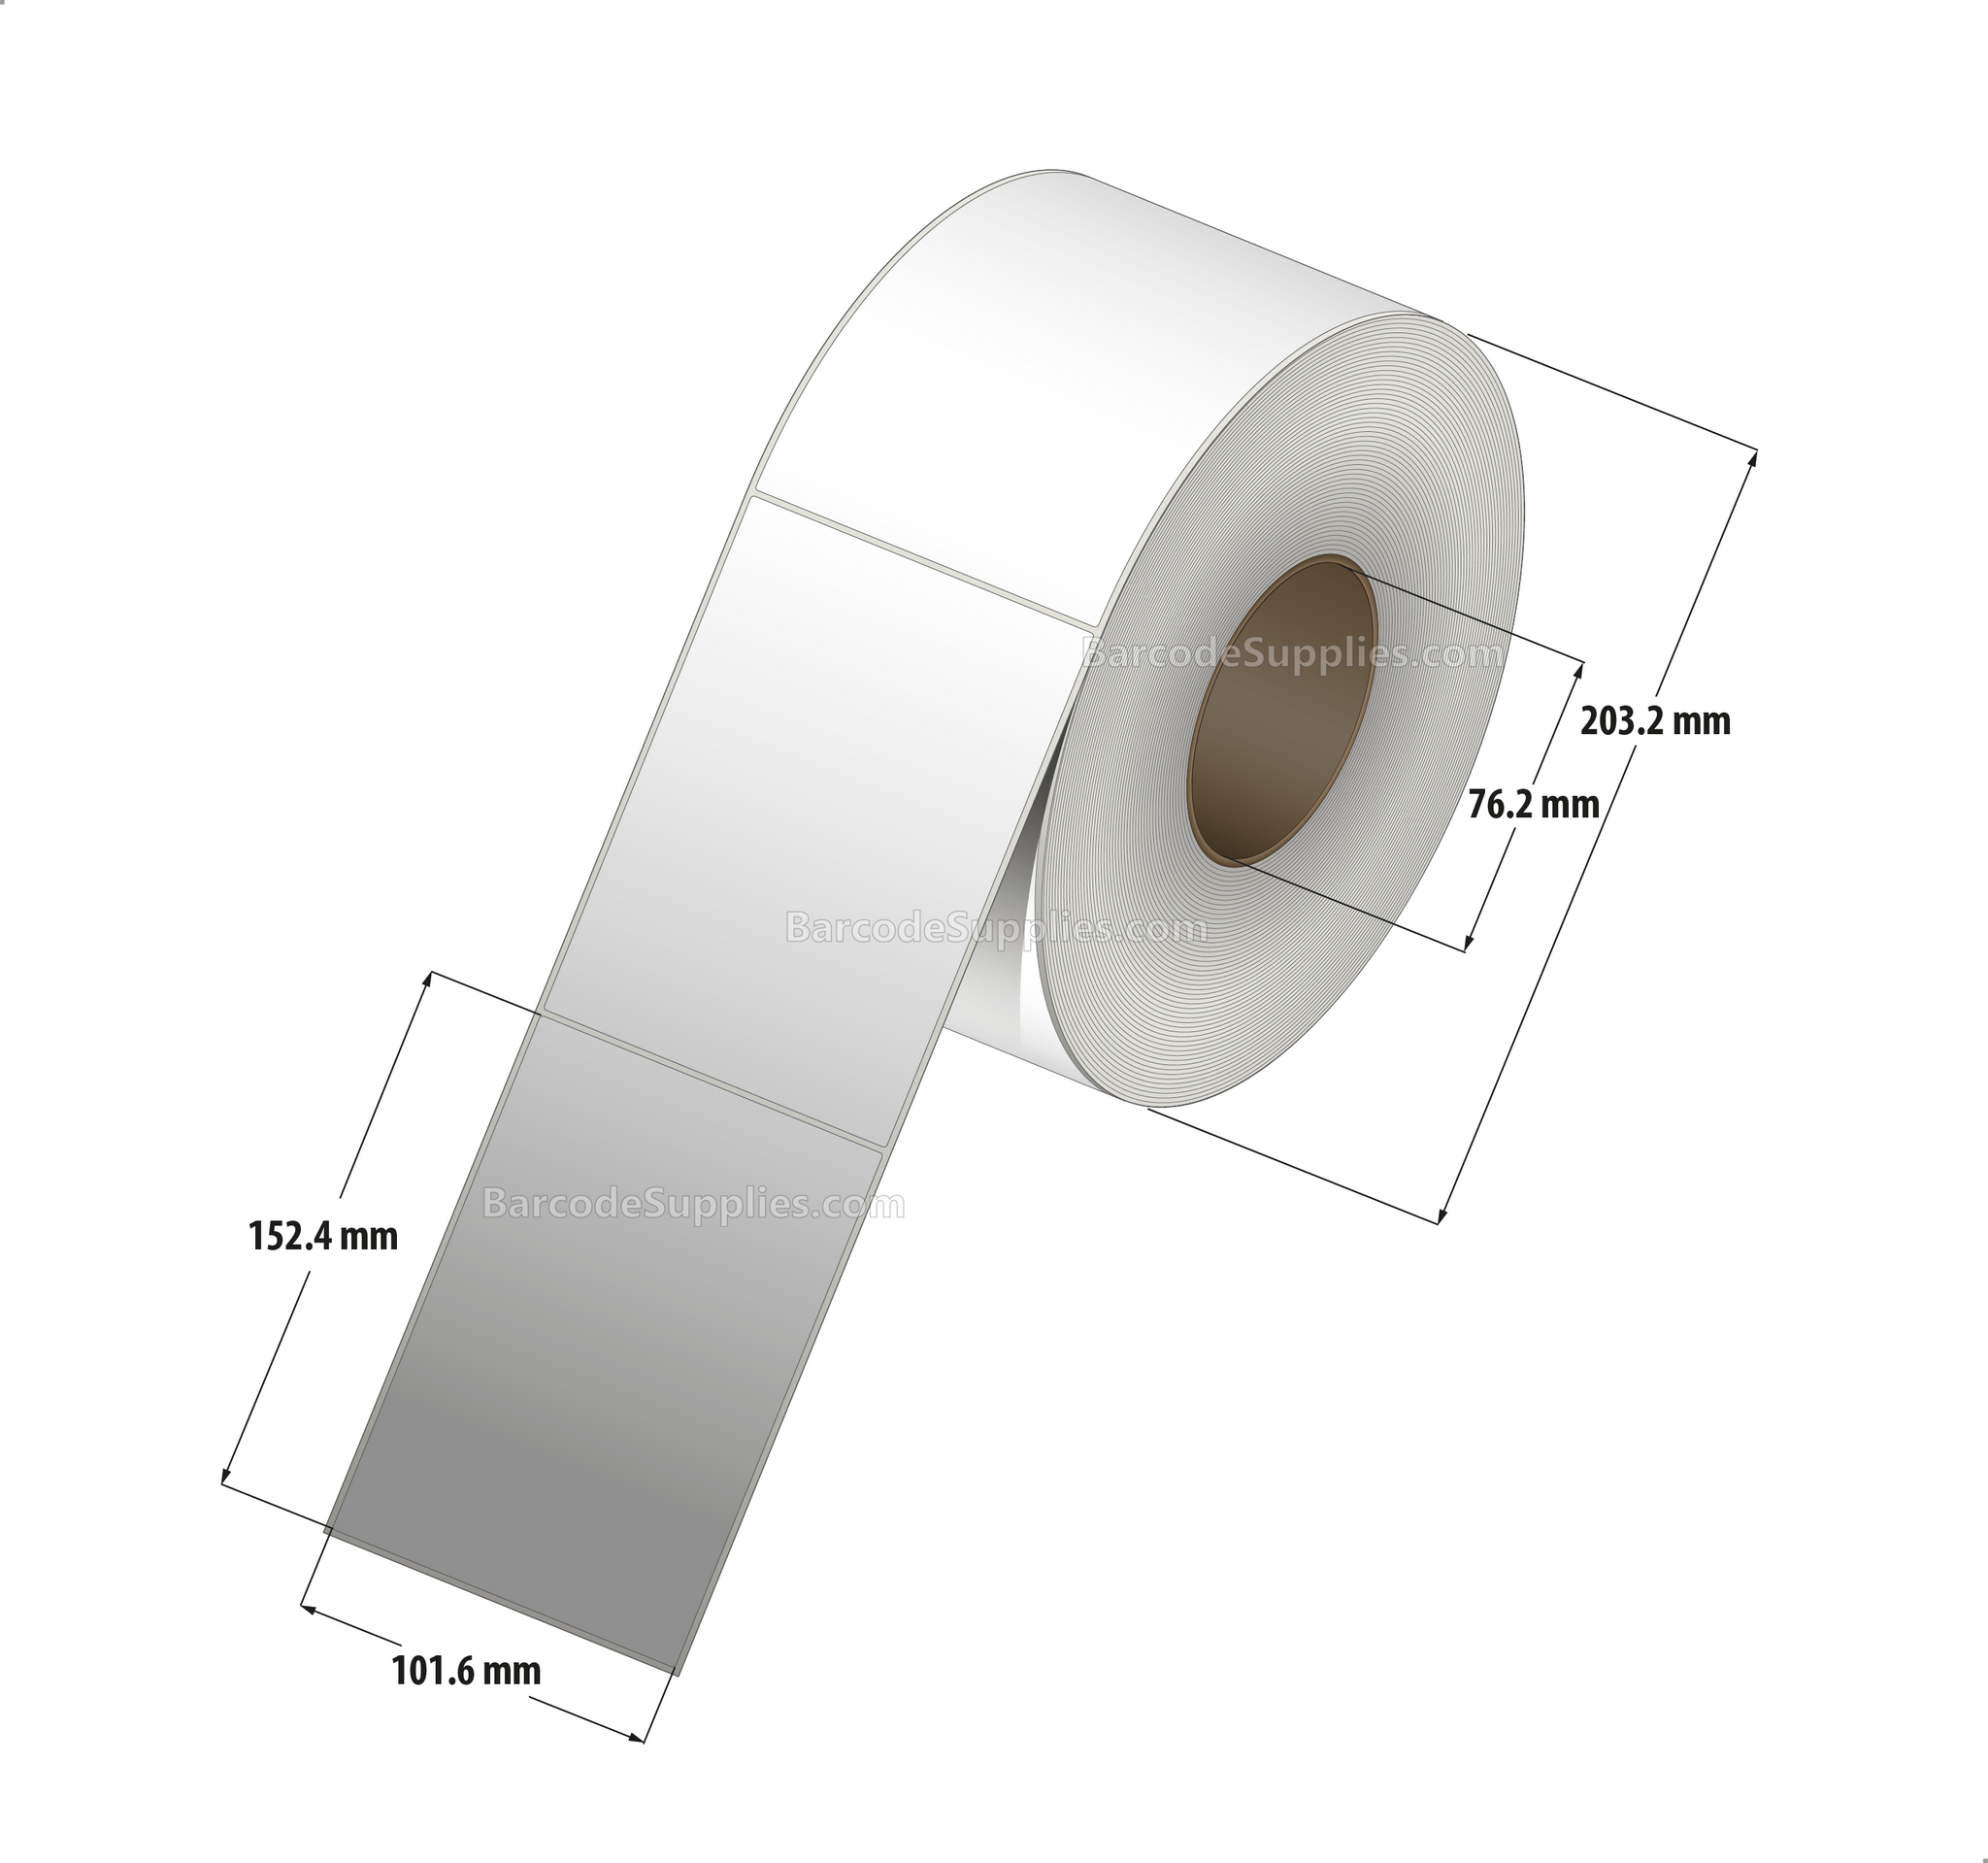 4 x 6 Thermal Transfer White Labels With Permanent Adhesive - No Perforation - 1000 Labels Per Roll - Carton Of 4 Rolls - 4000 Labels Total - MPN: RT-4-6-1000-NP